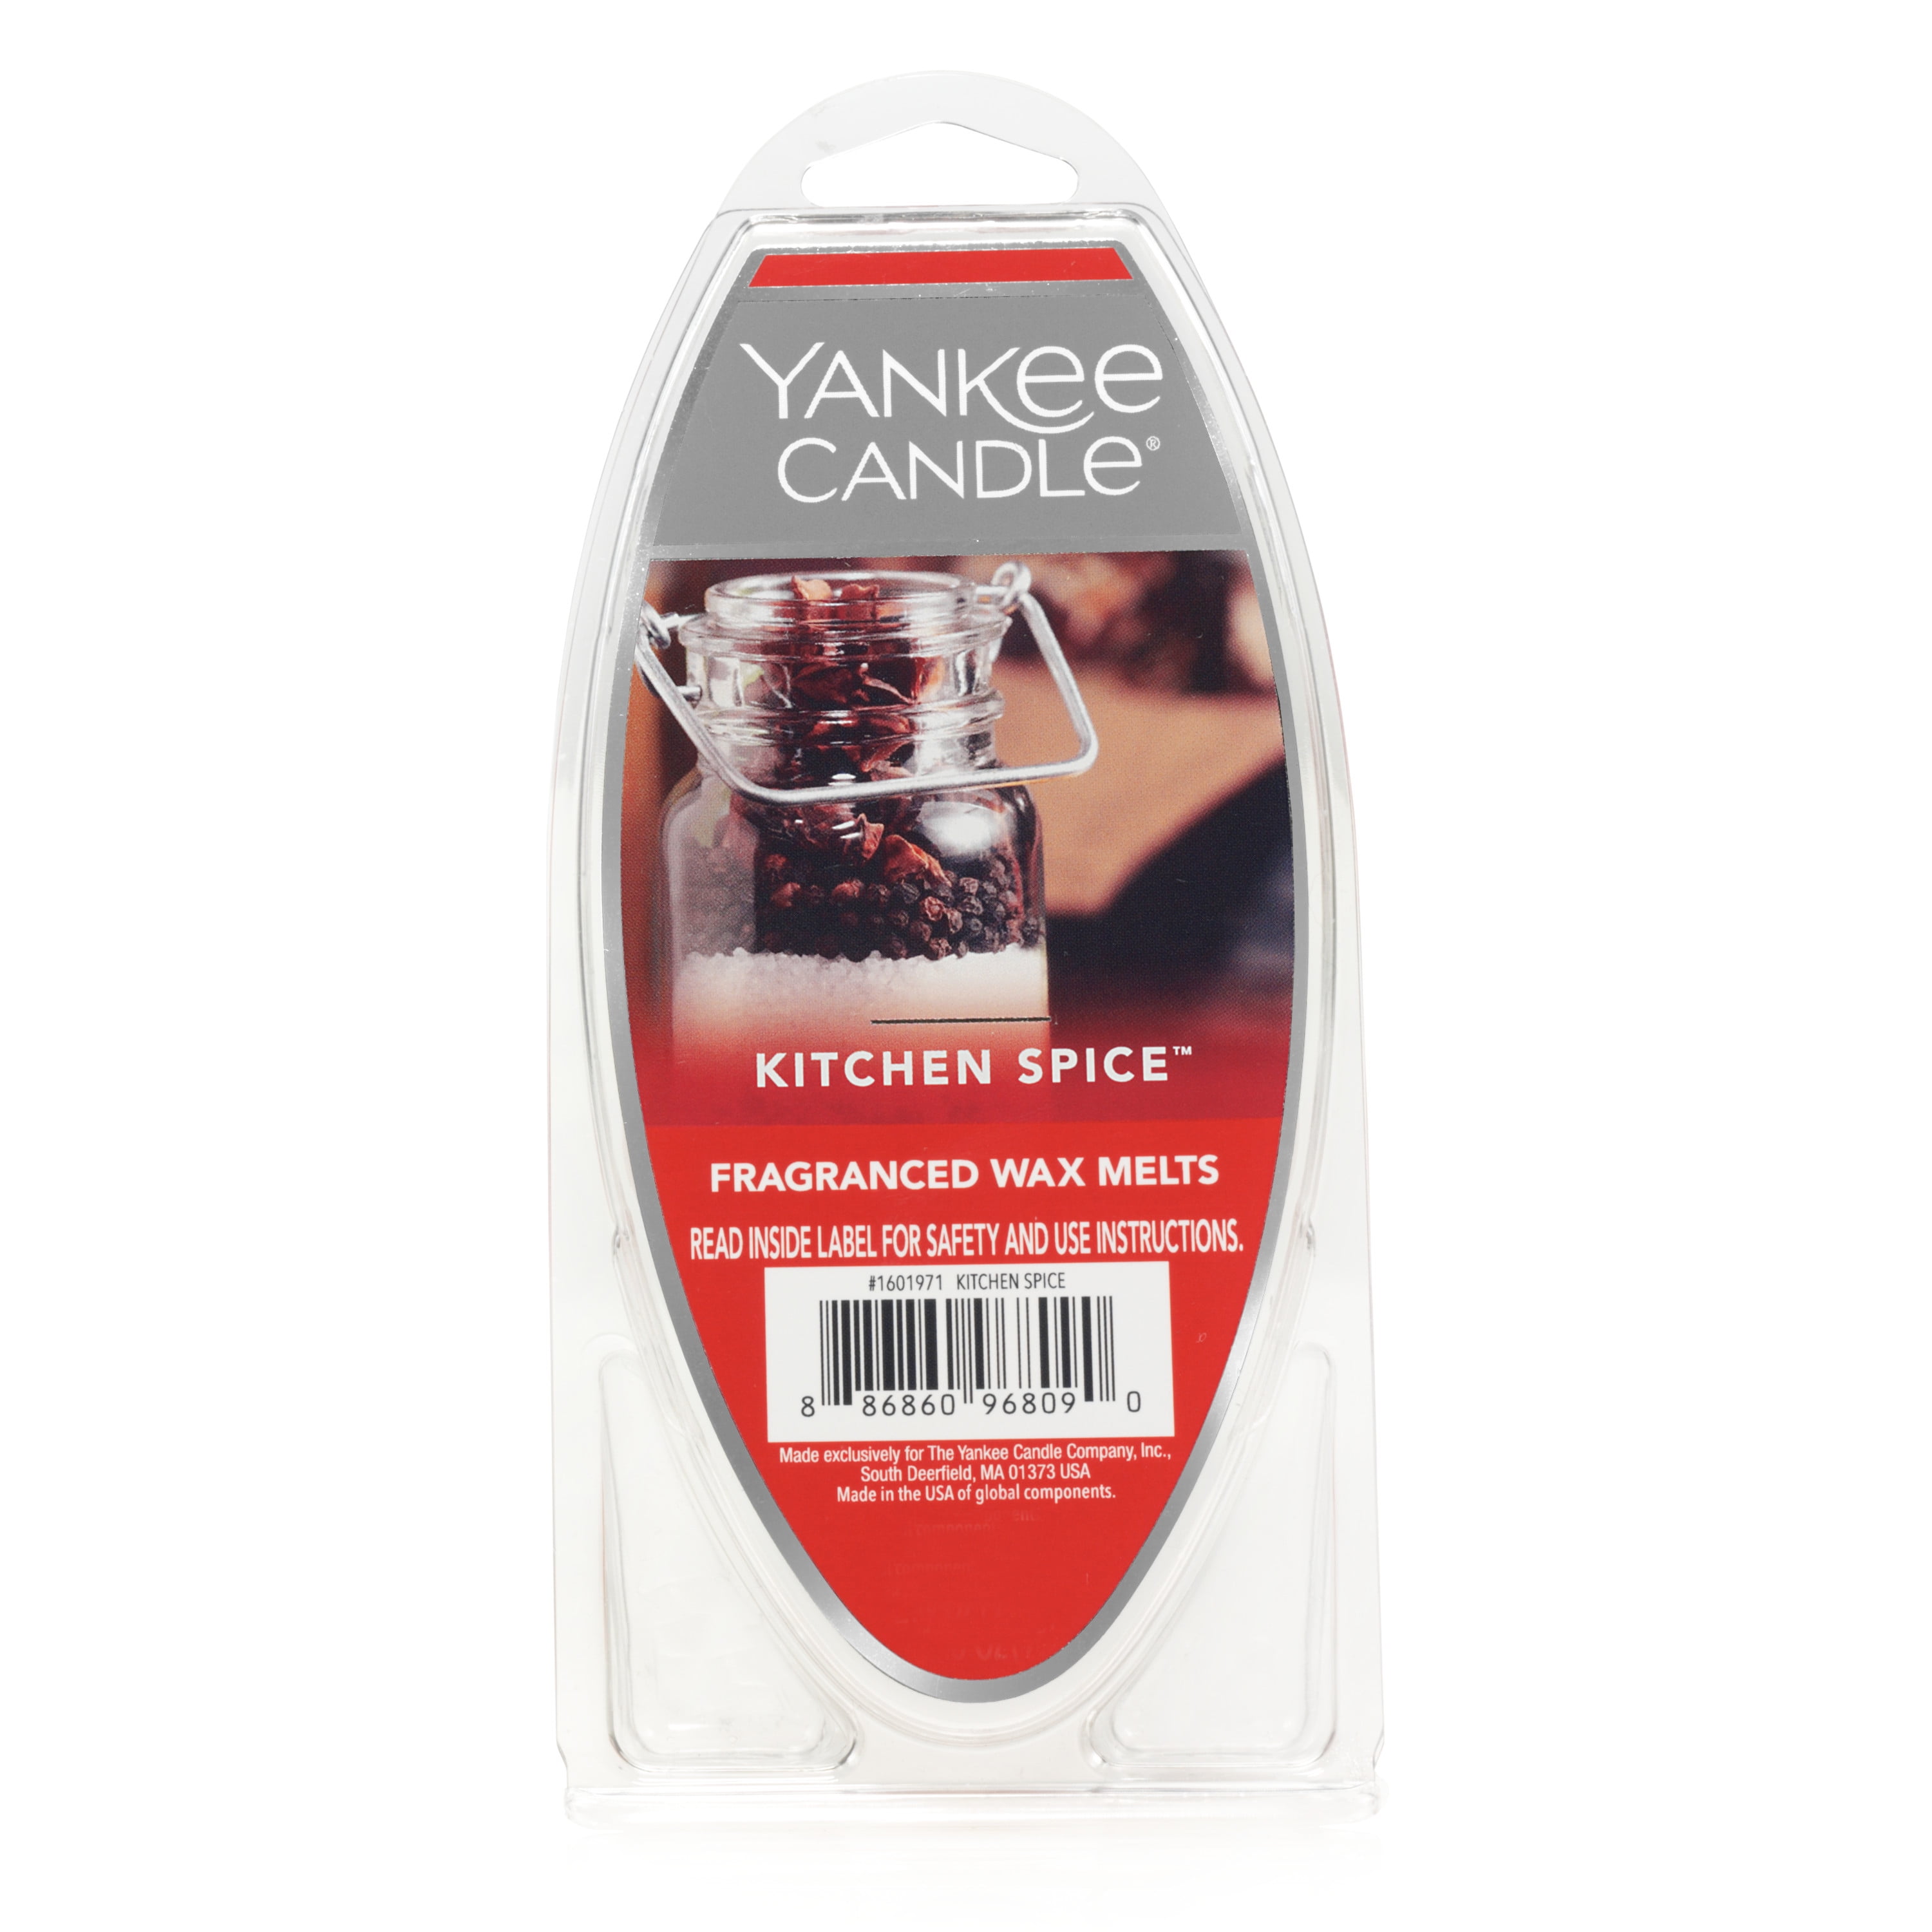 Yankee Candle Kitchen Spice Fragranced Wax Melts (Single Pack)